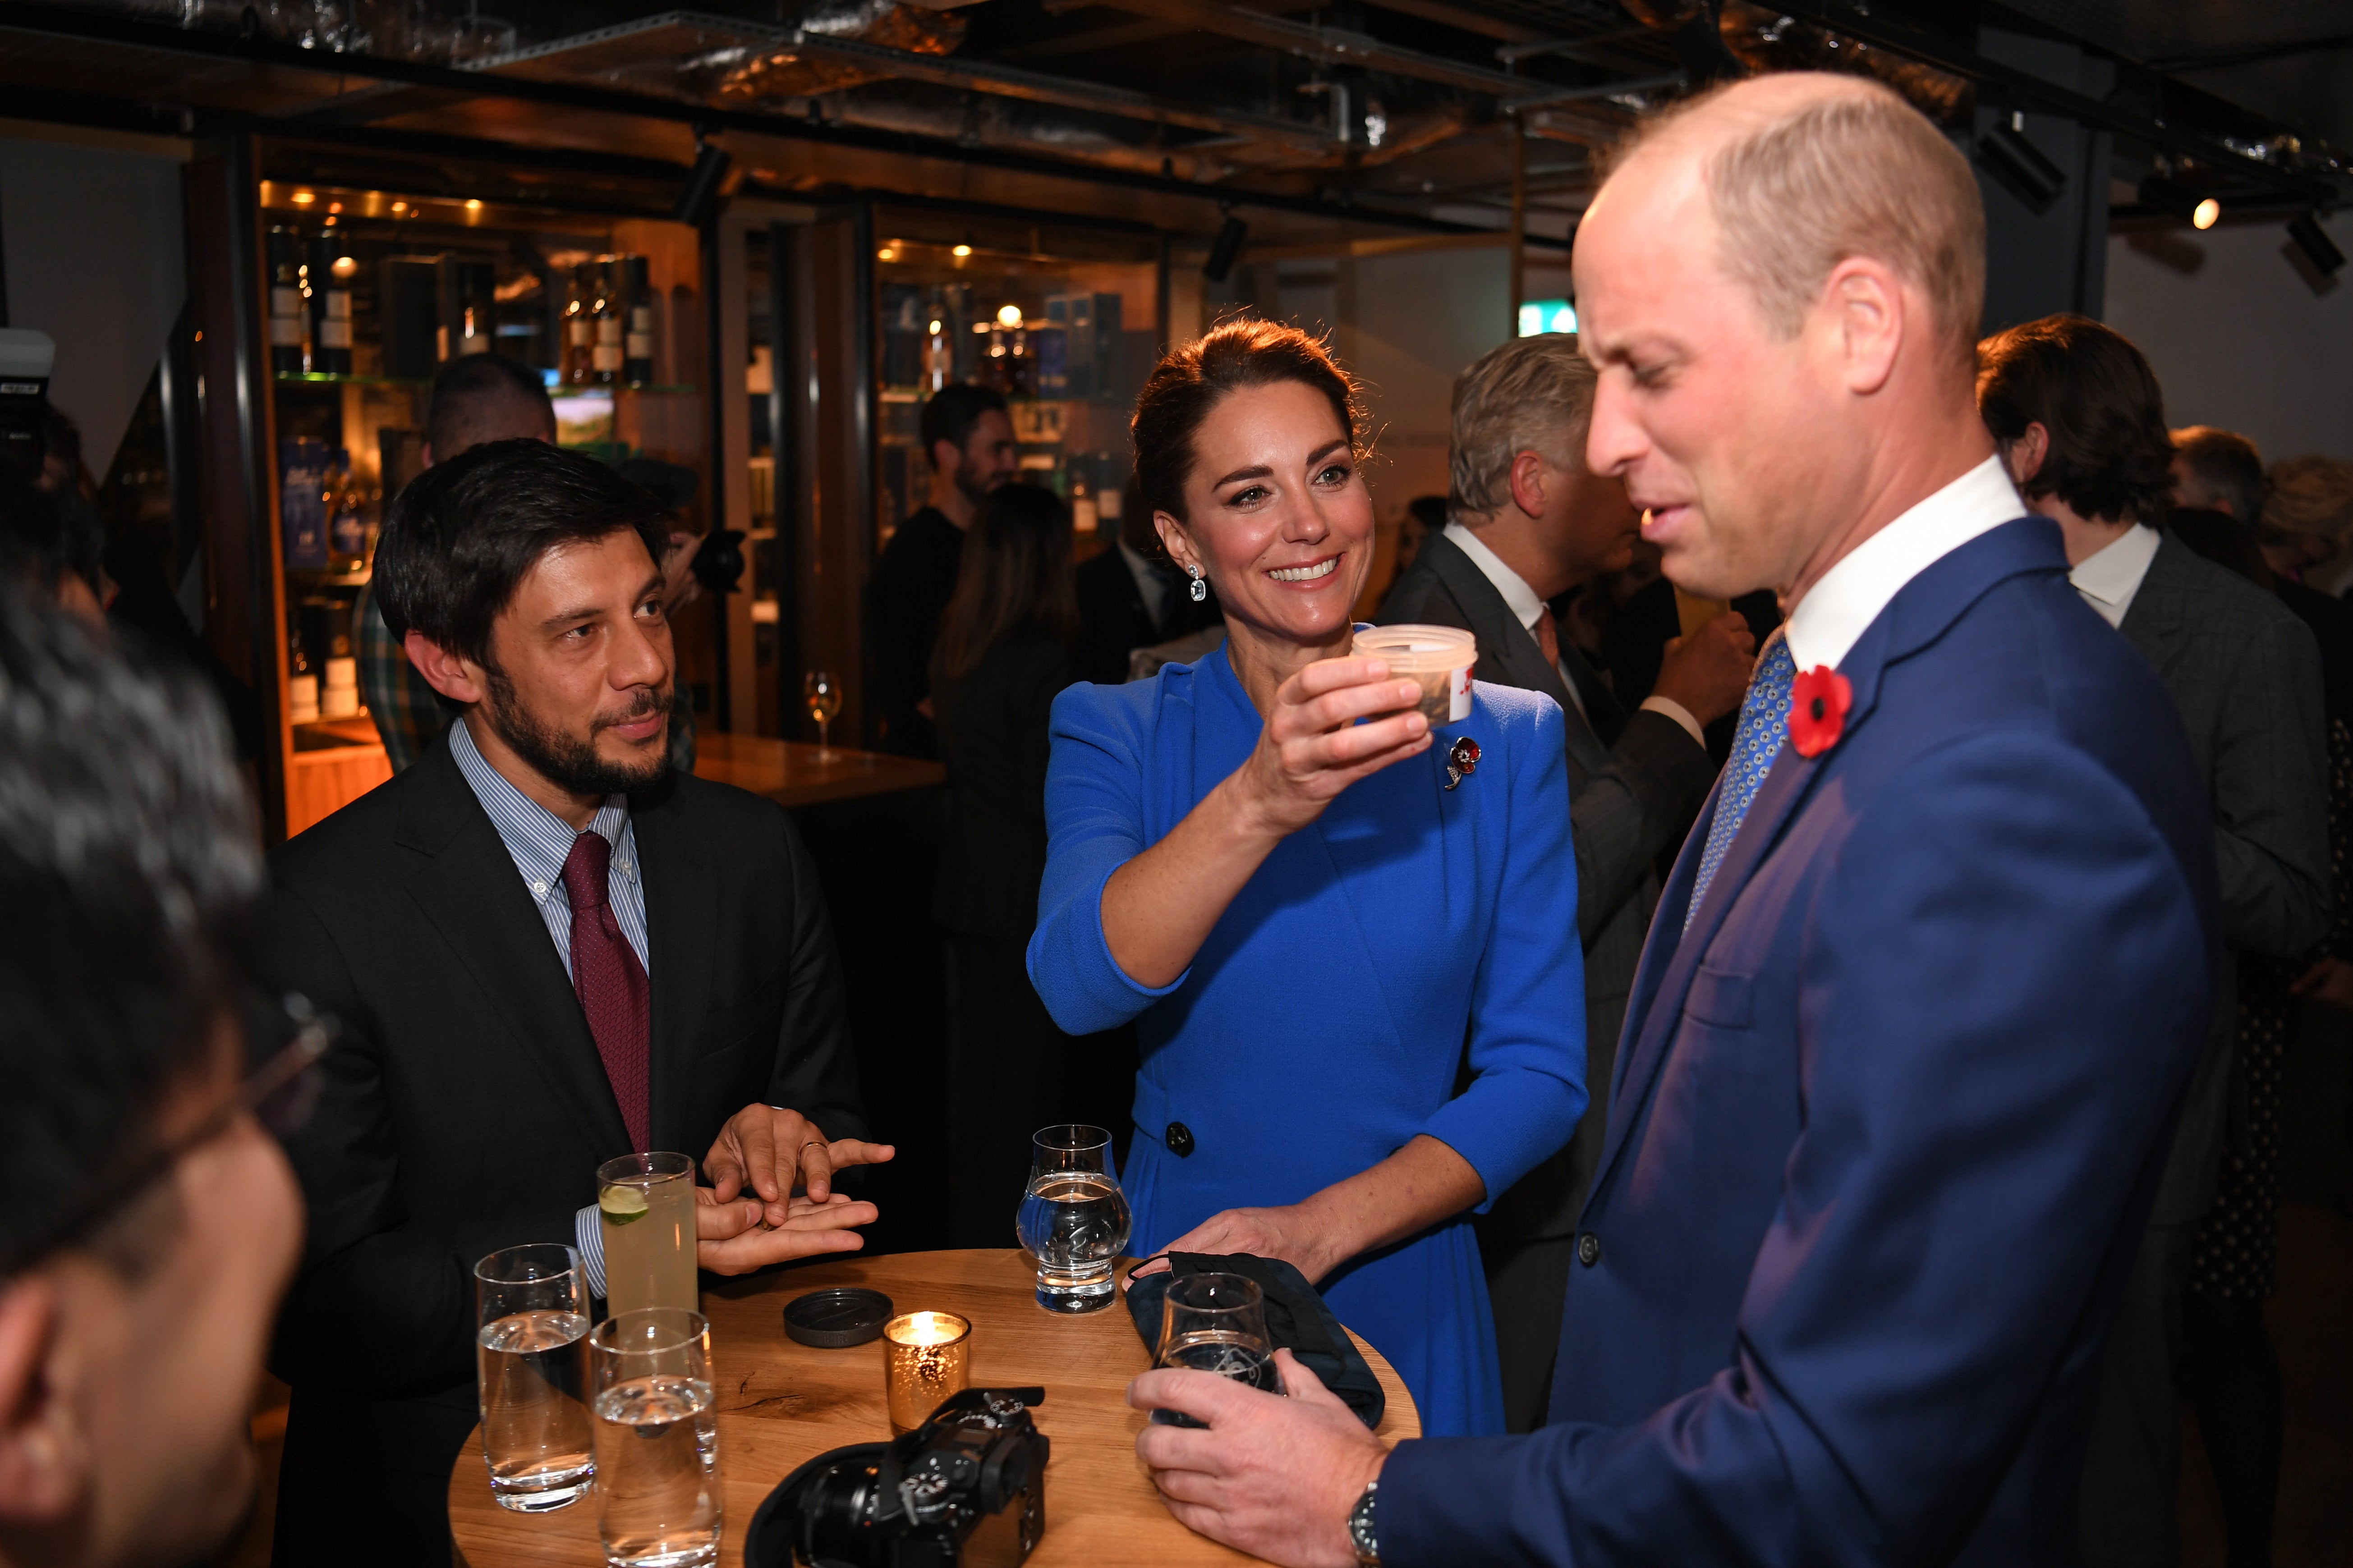 Prince William grimaces as Kate Middleton offers him a jar of dead bugs